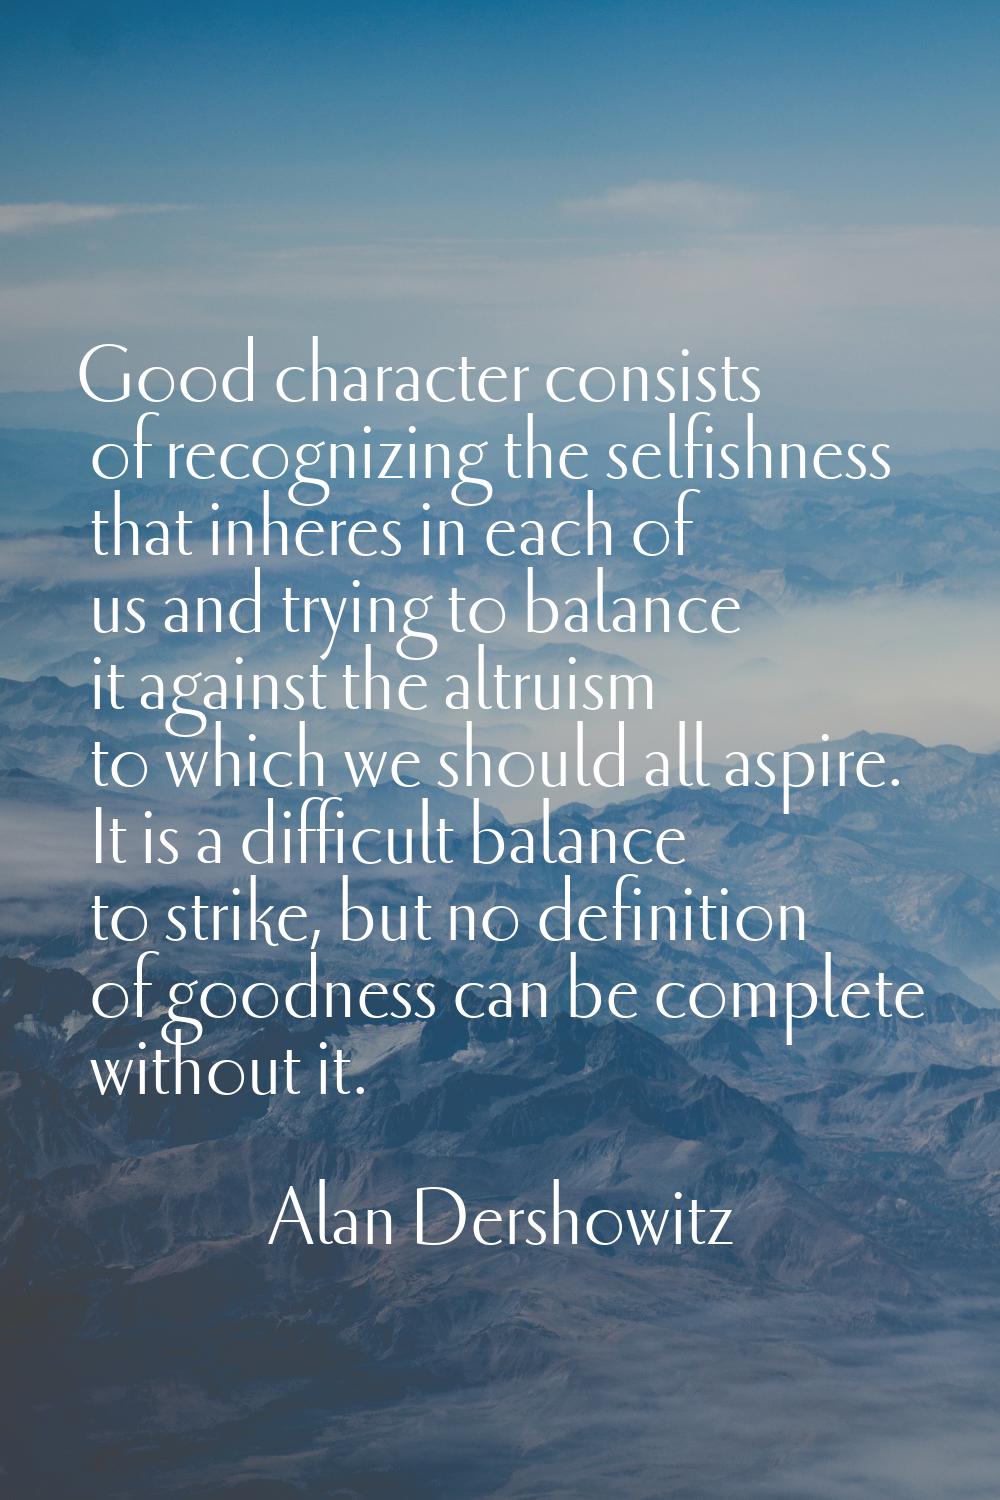 Good character consists of recognizing the selfishness that inheres in each of us and trying to bal